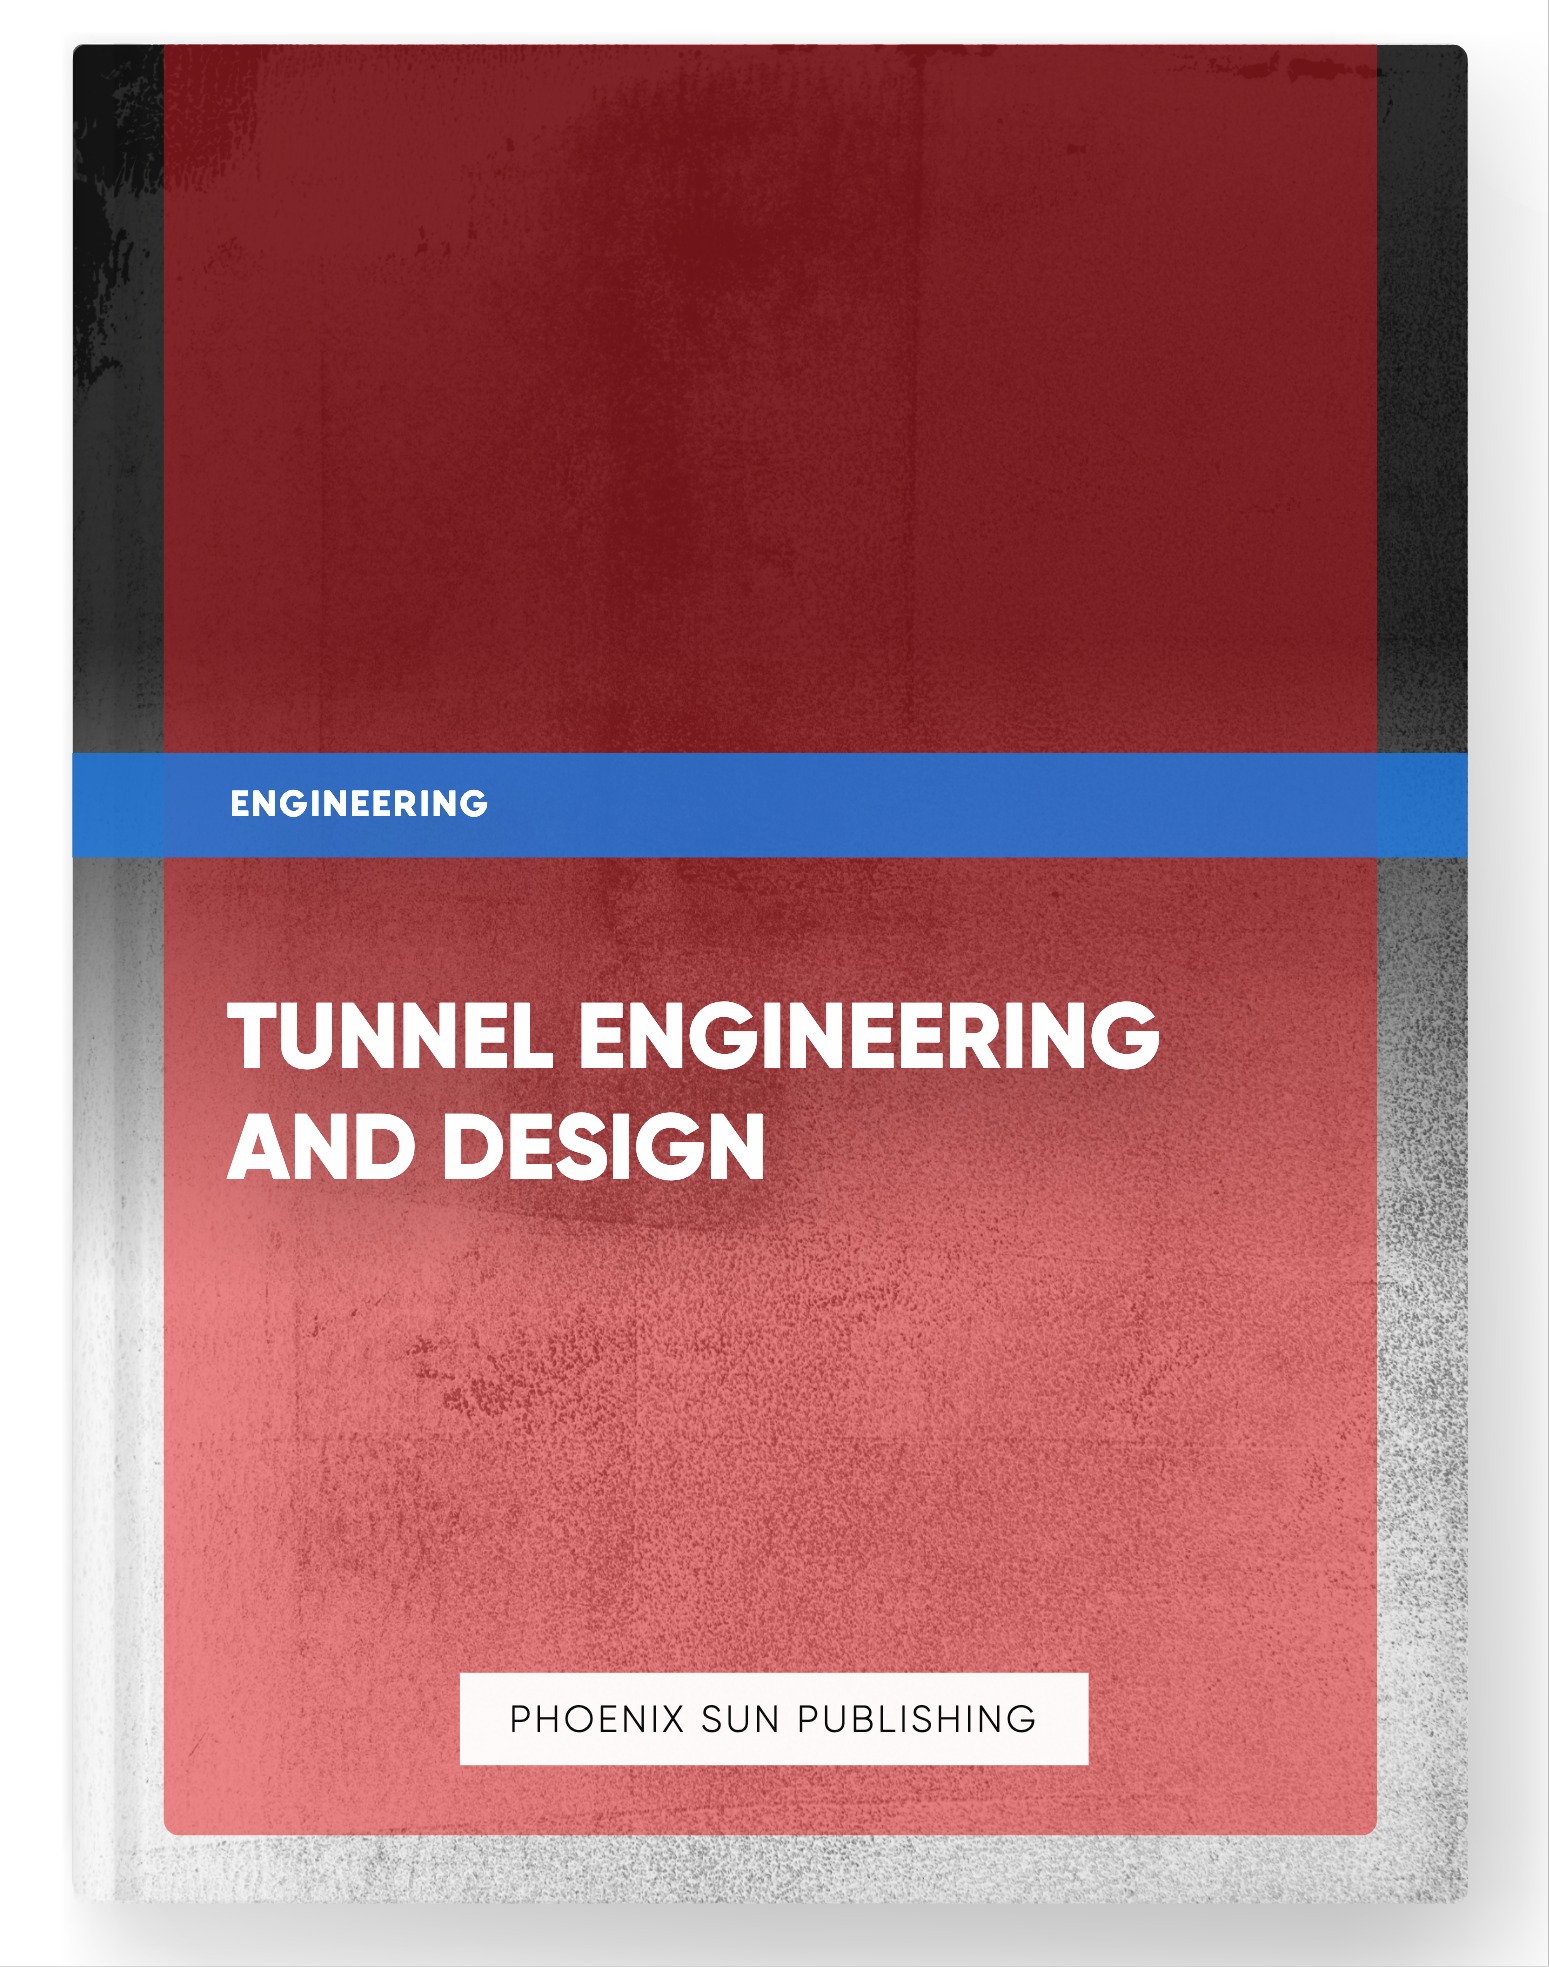 Tunnel Engineering and Design